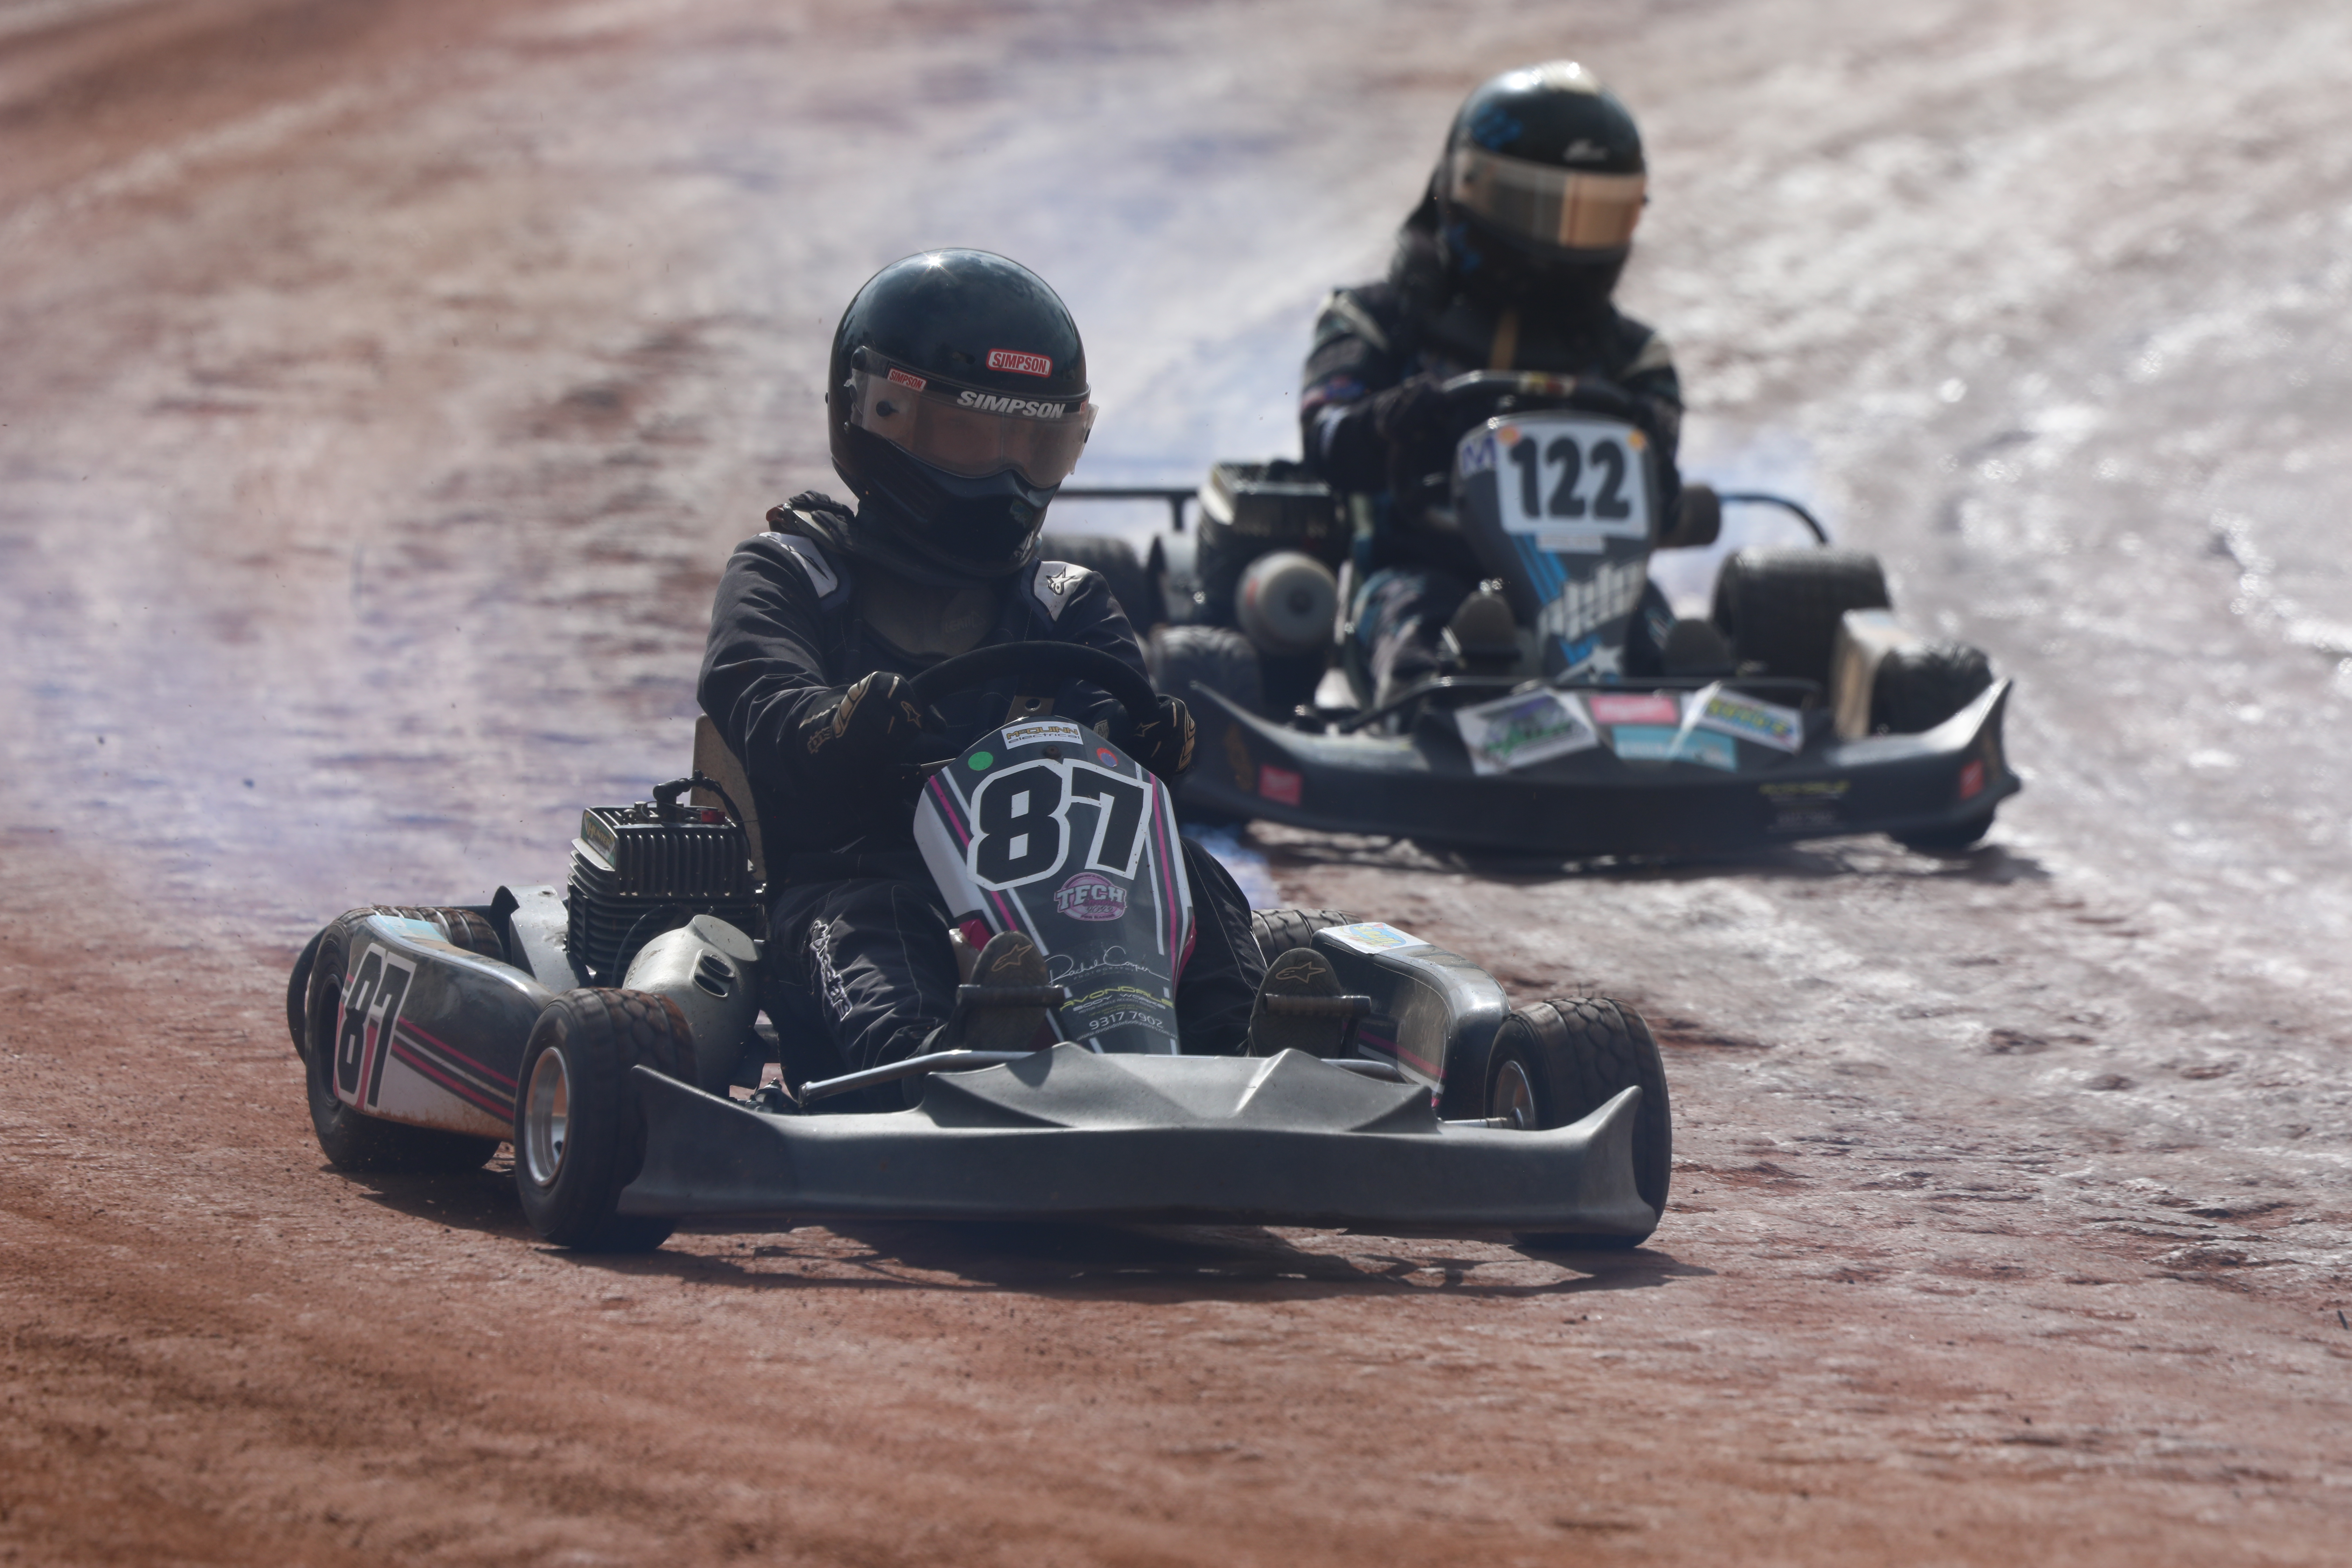 Two go karts on a track mid race